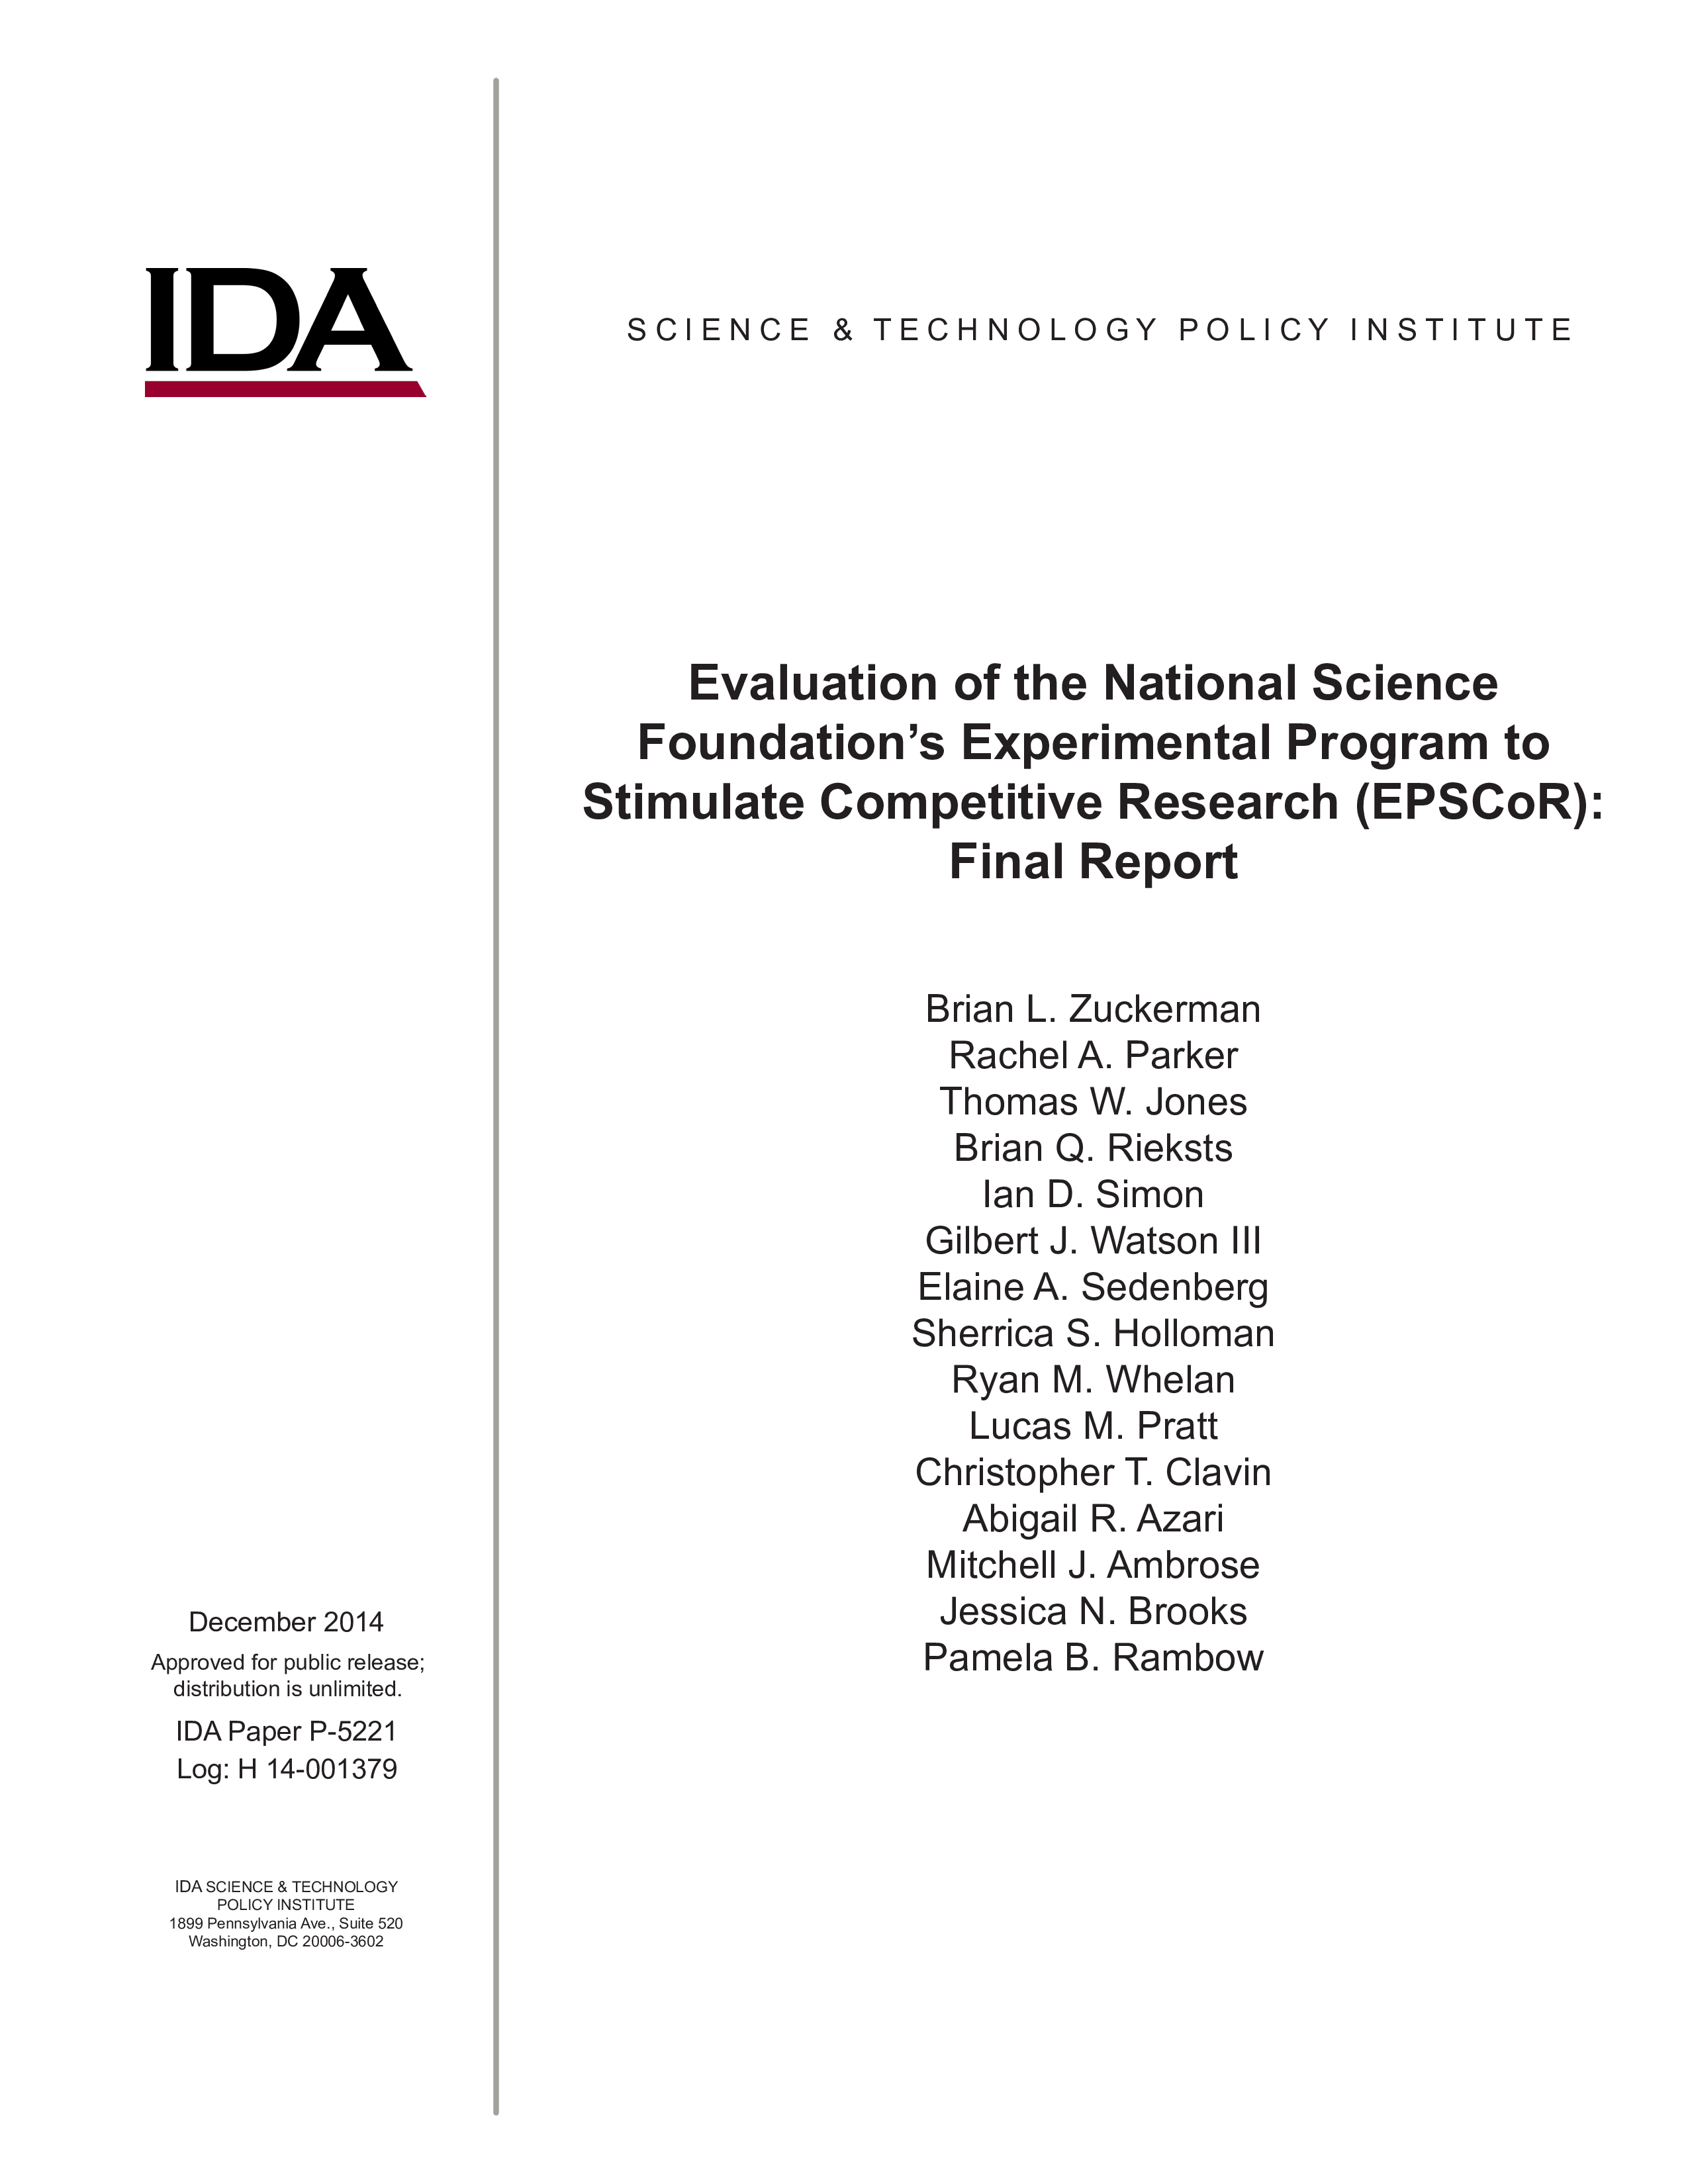 Evaluation of the National Science Foundation’s Experimental Program to Stimulate Competitive Research (EPSCoR): Final Report 